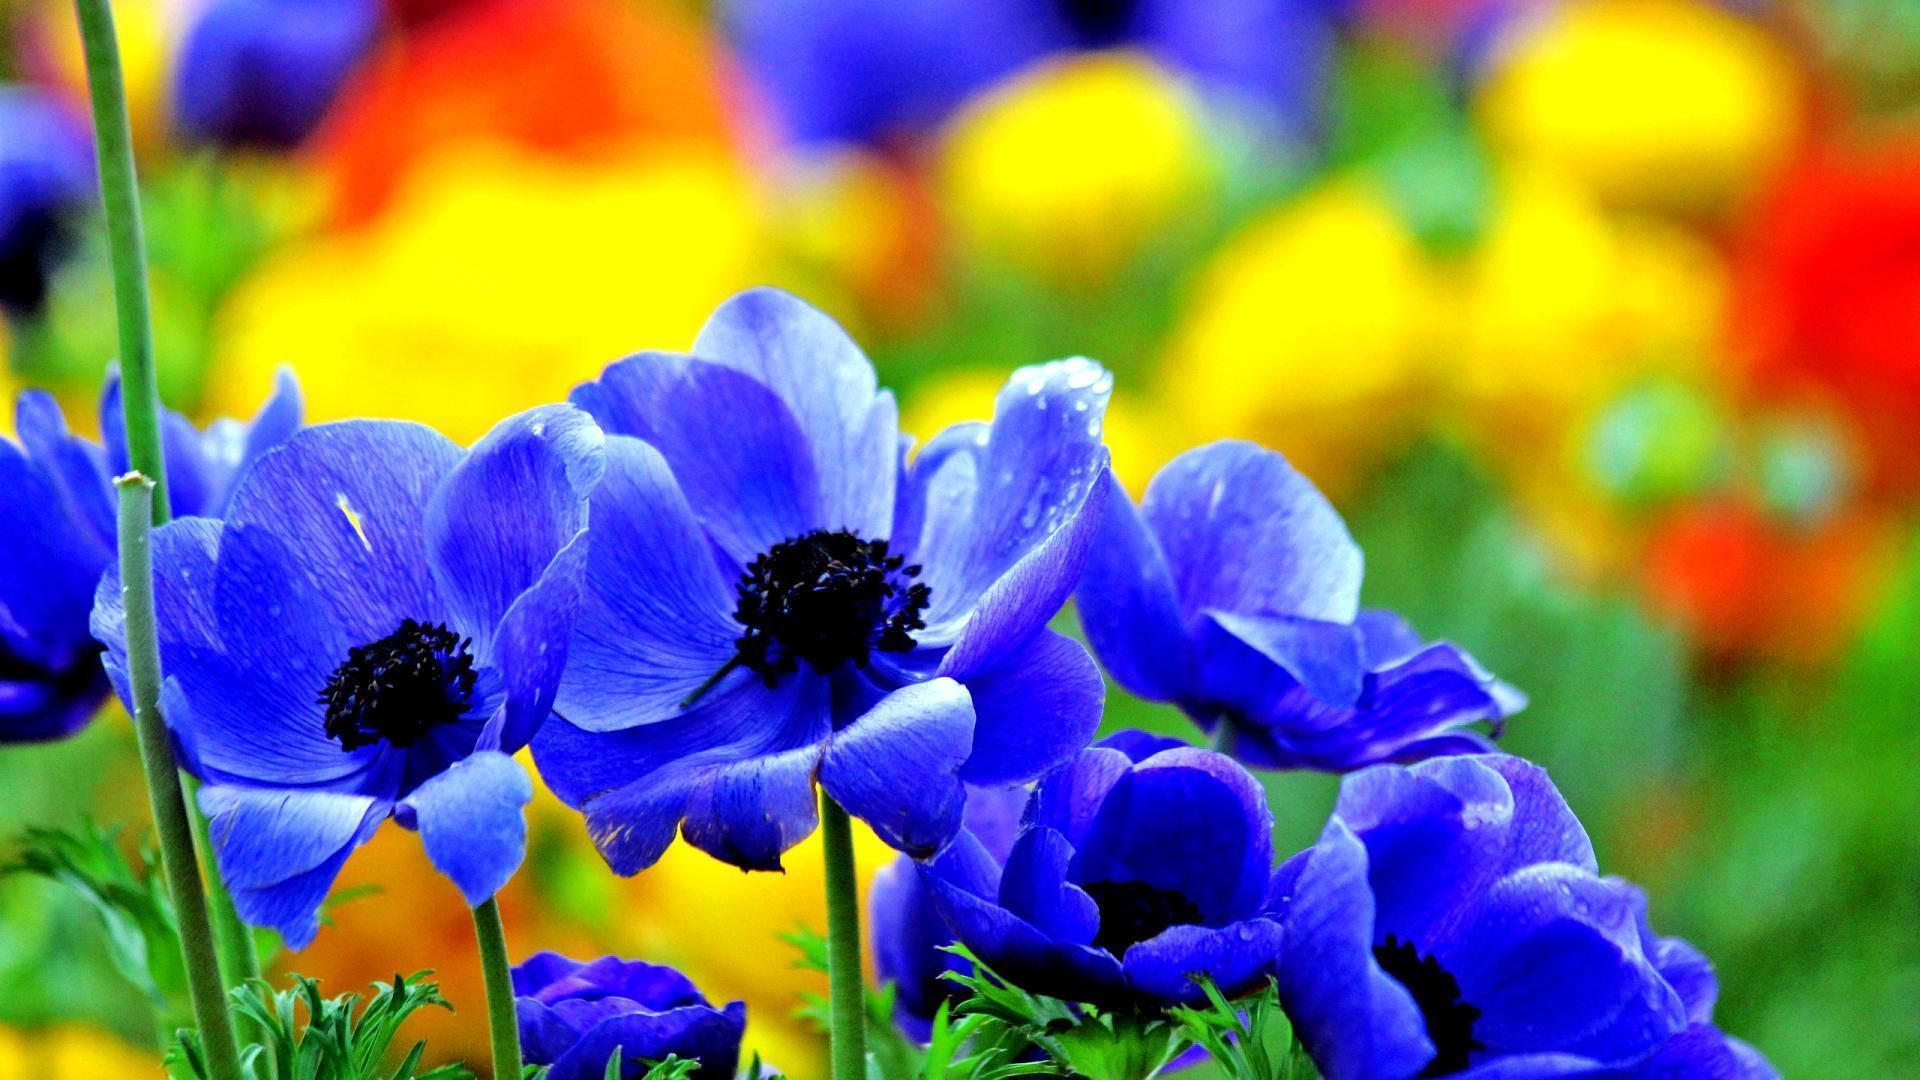 Flower Hd Wallpaper For Pc - Goimages Connect